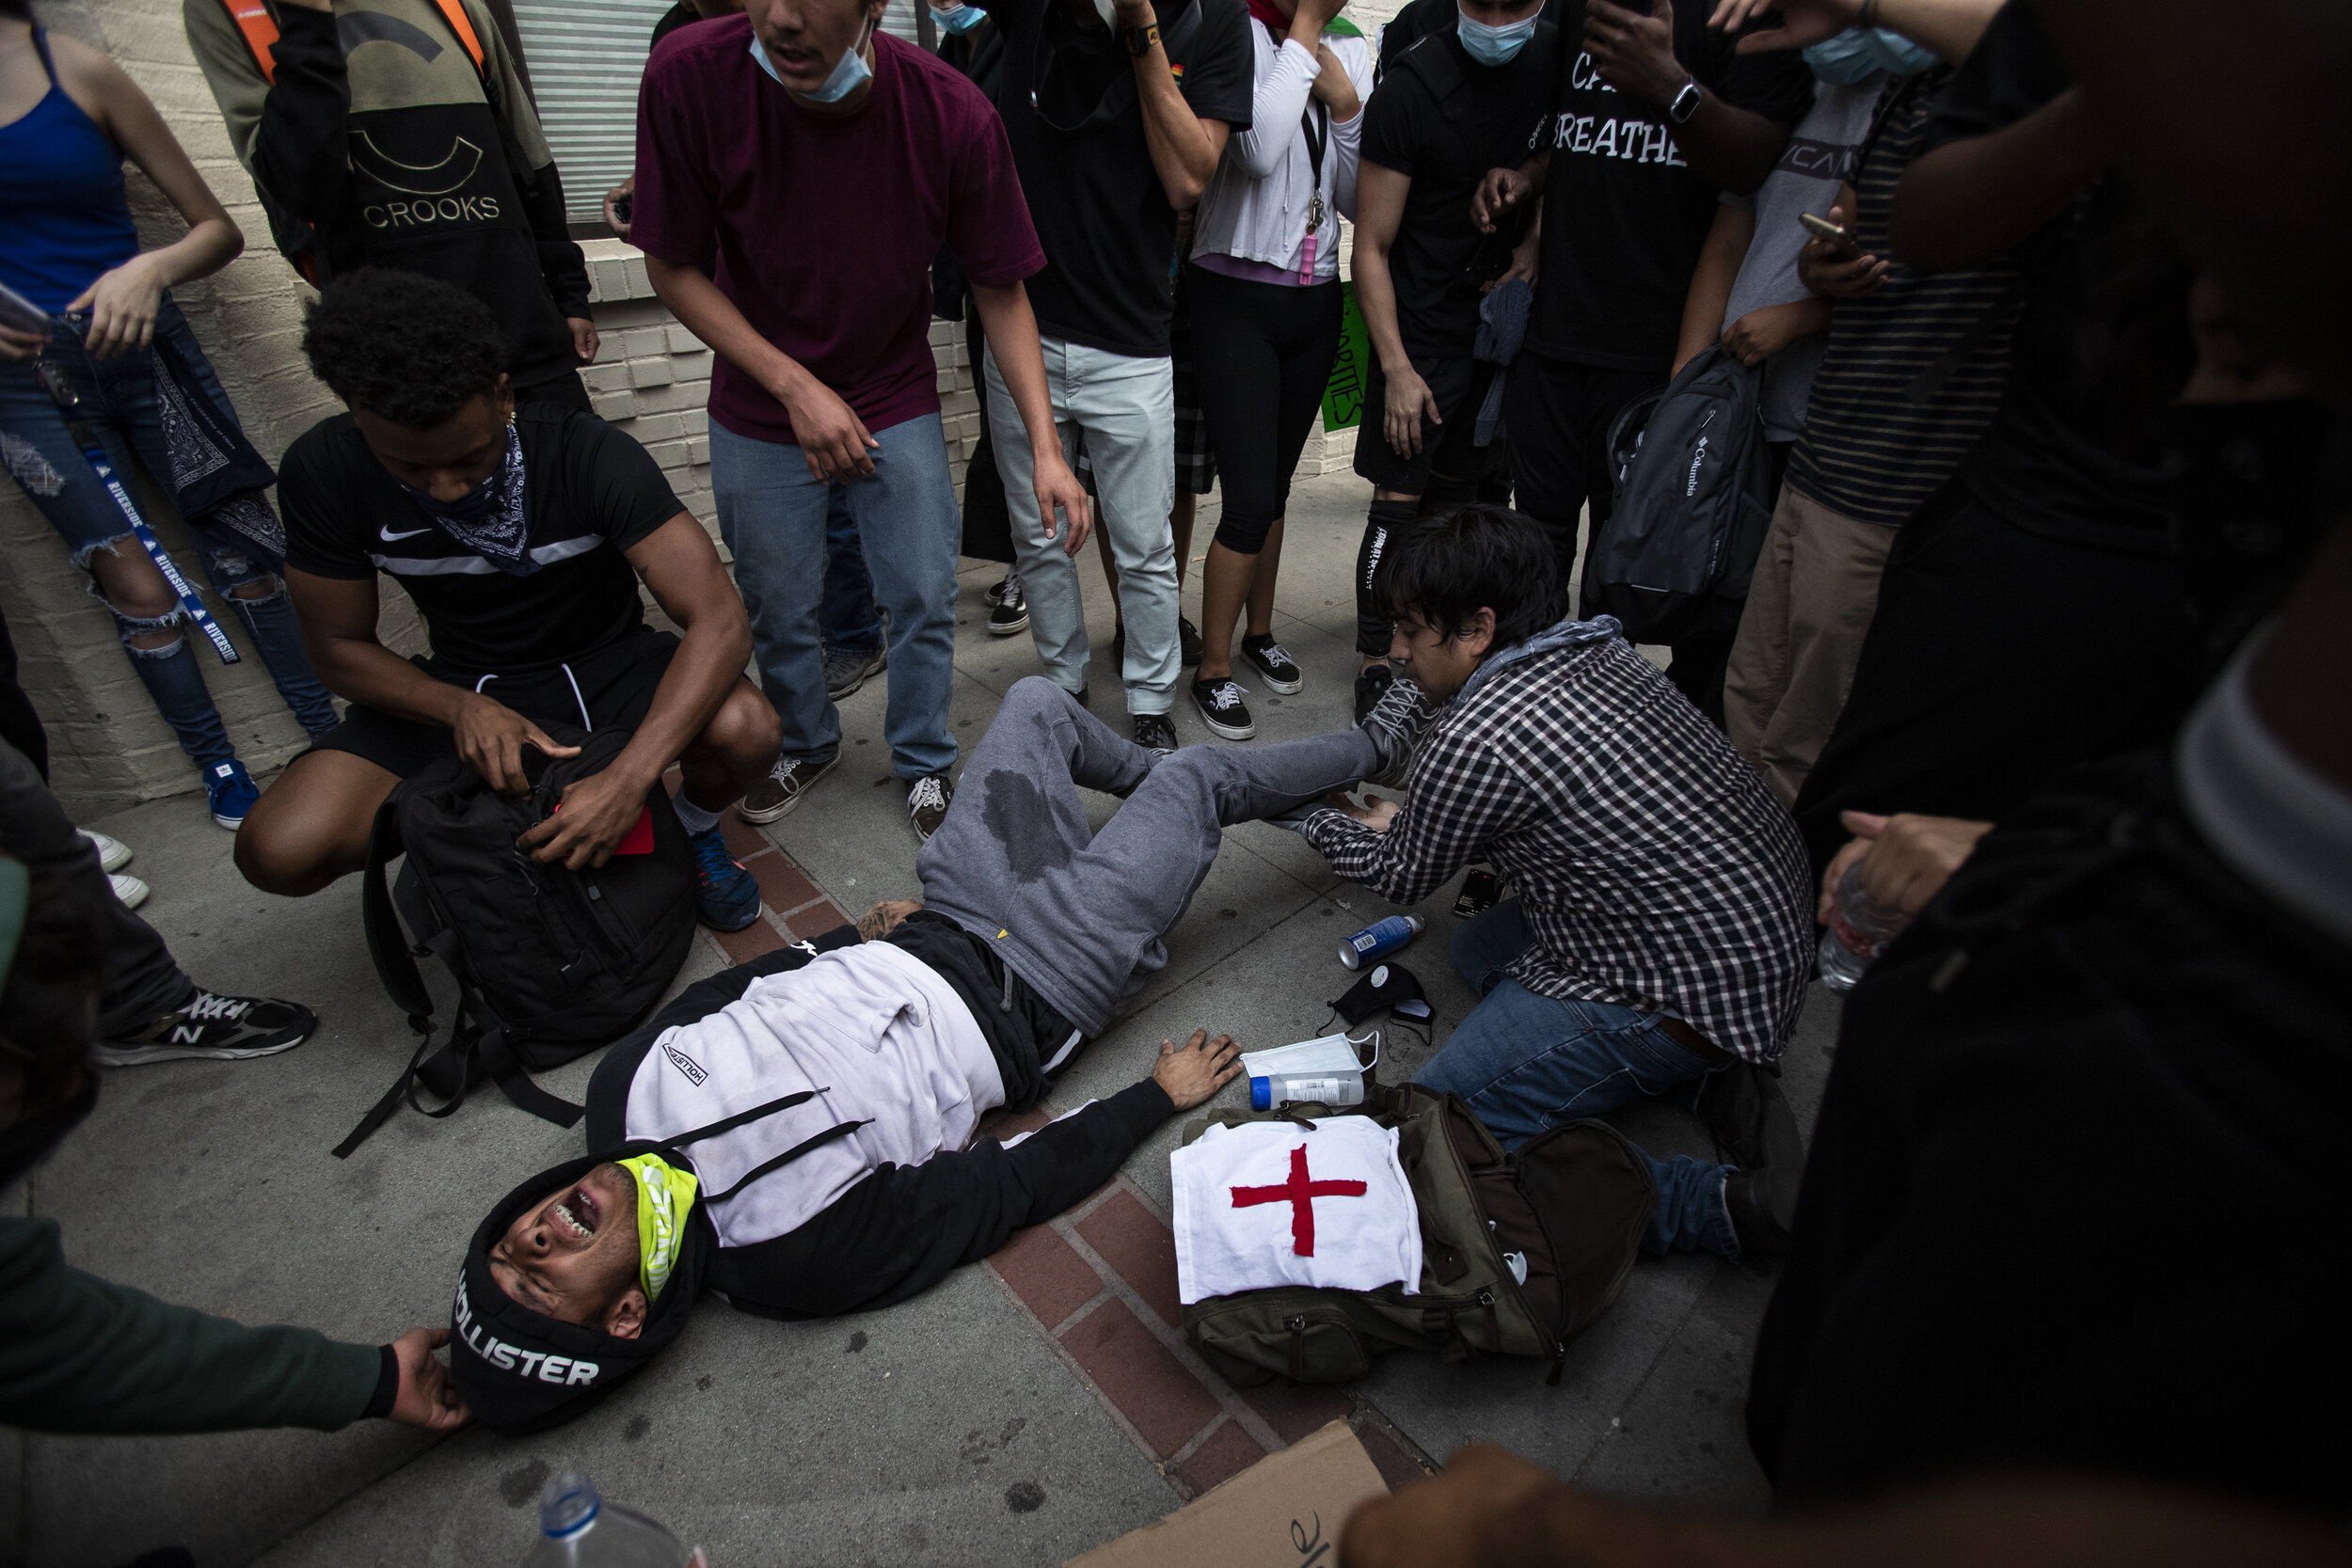  RIVERSIDE, CA - JUNE 1, 2020: A demonstrator screams in pain after being injured while running from plastic rounds fired by Riverside County Sheriffs to push back protesters  who refused to disperse after curfew during a protest against the death of